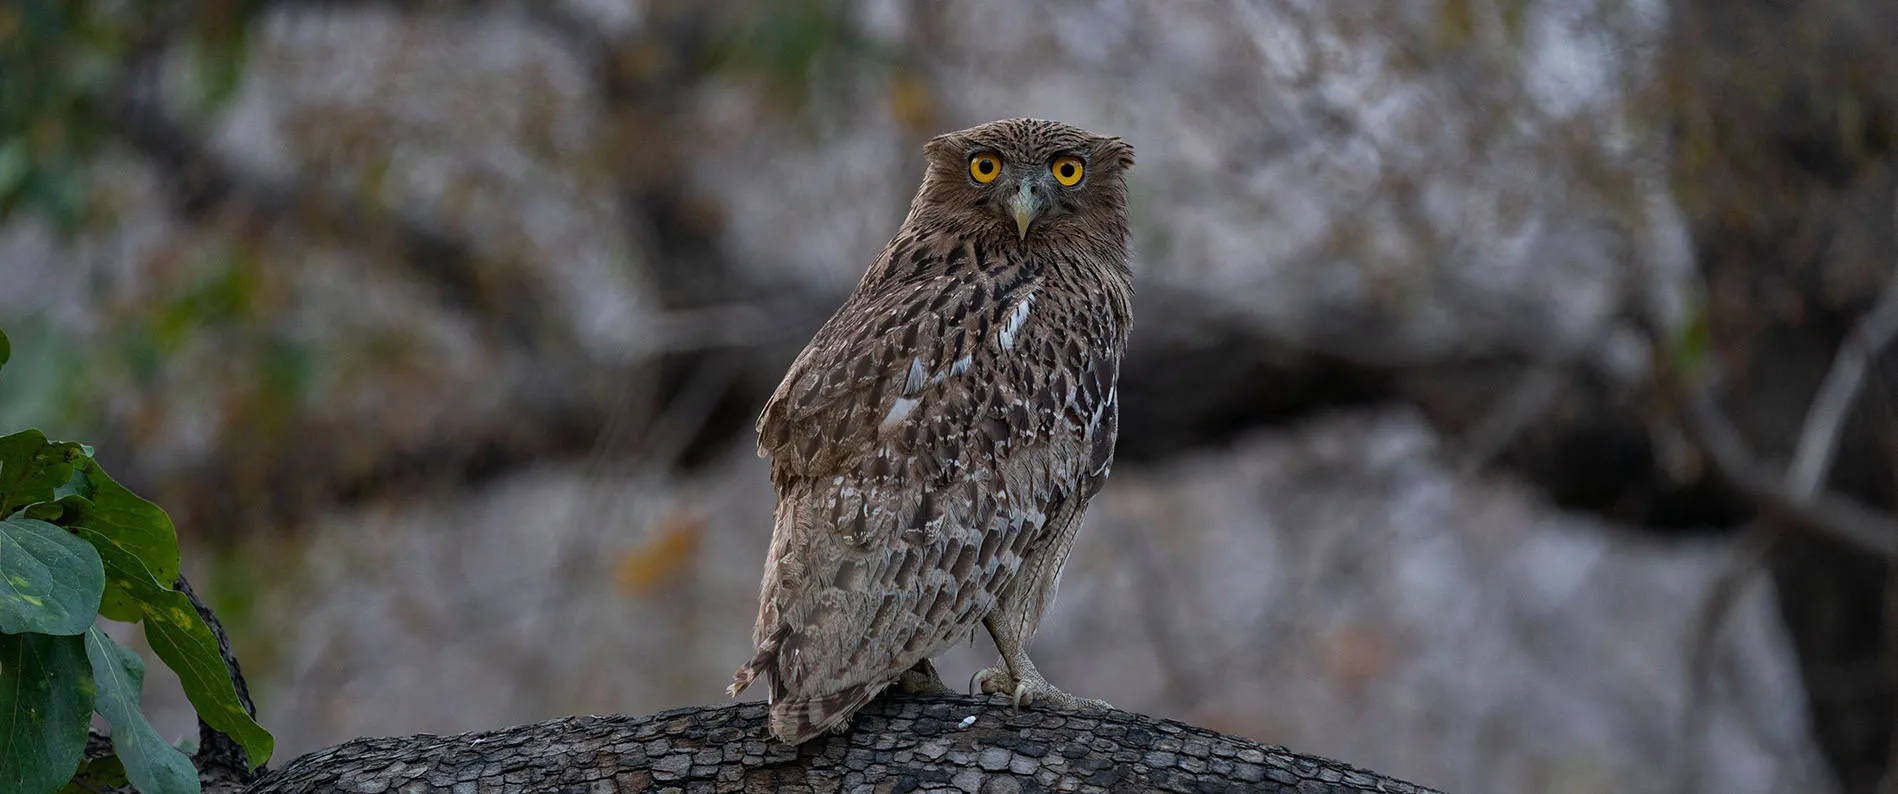 Along with majestic tigers, you get to see different birds, such as this owl captured during the Ranthambore tiger safari.